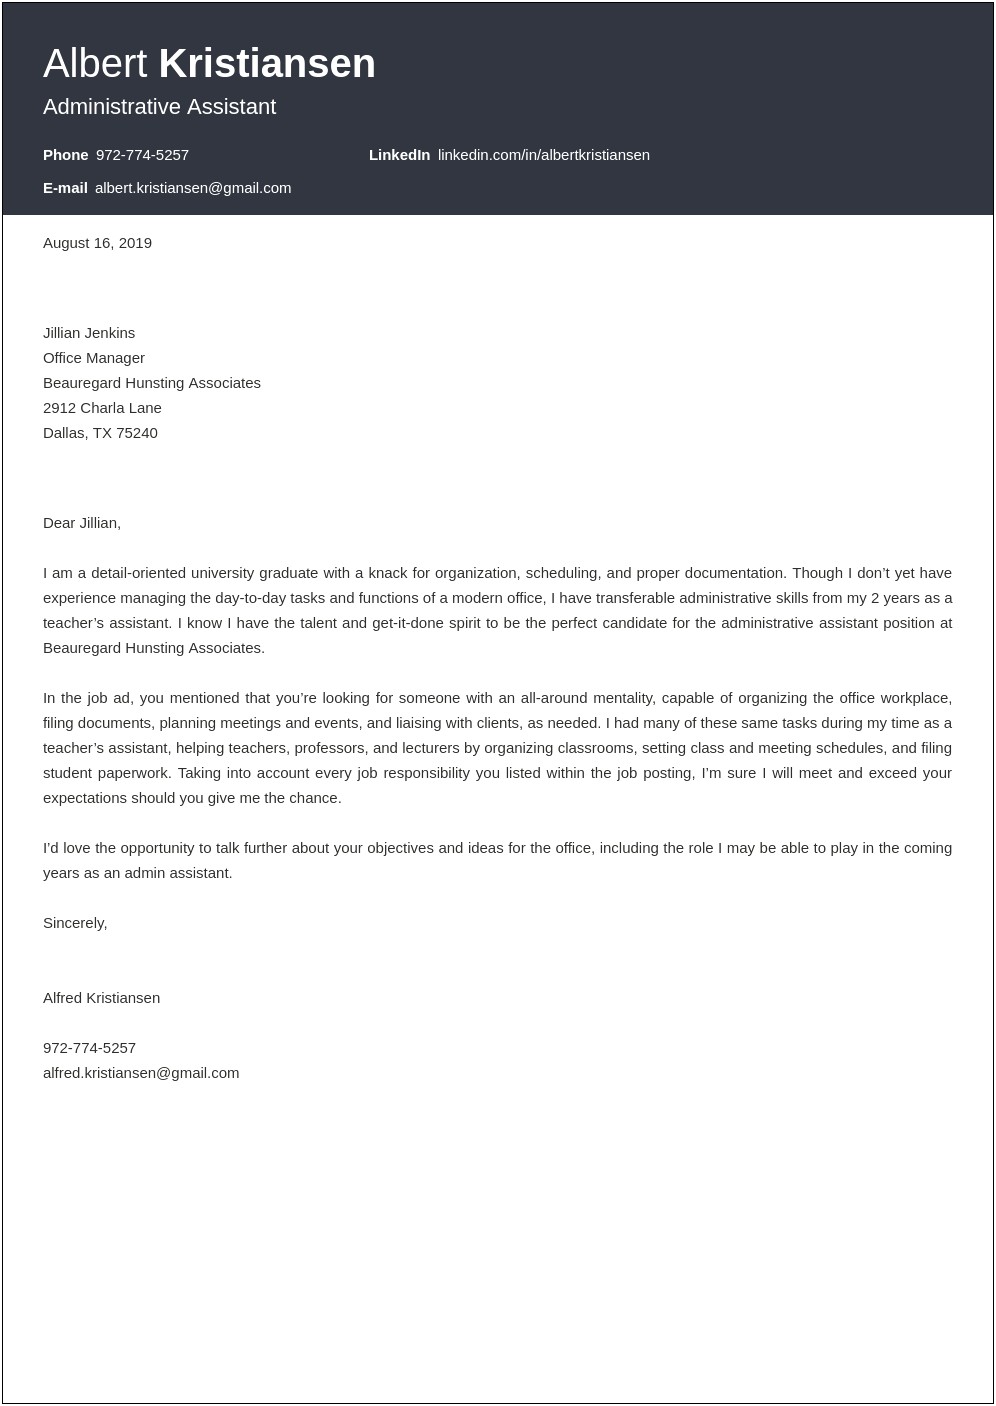 Sample Cover Letter With Resume Administrative